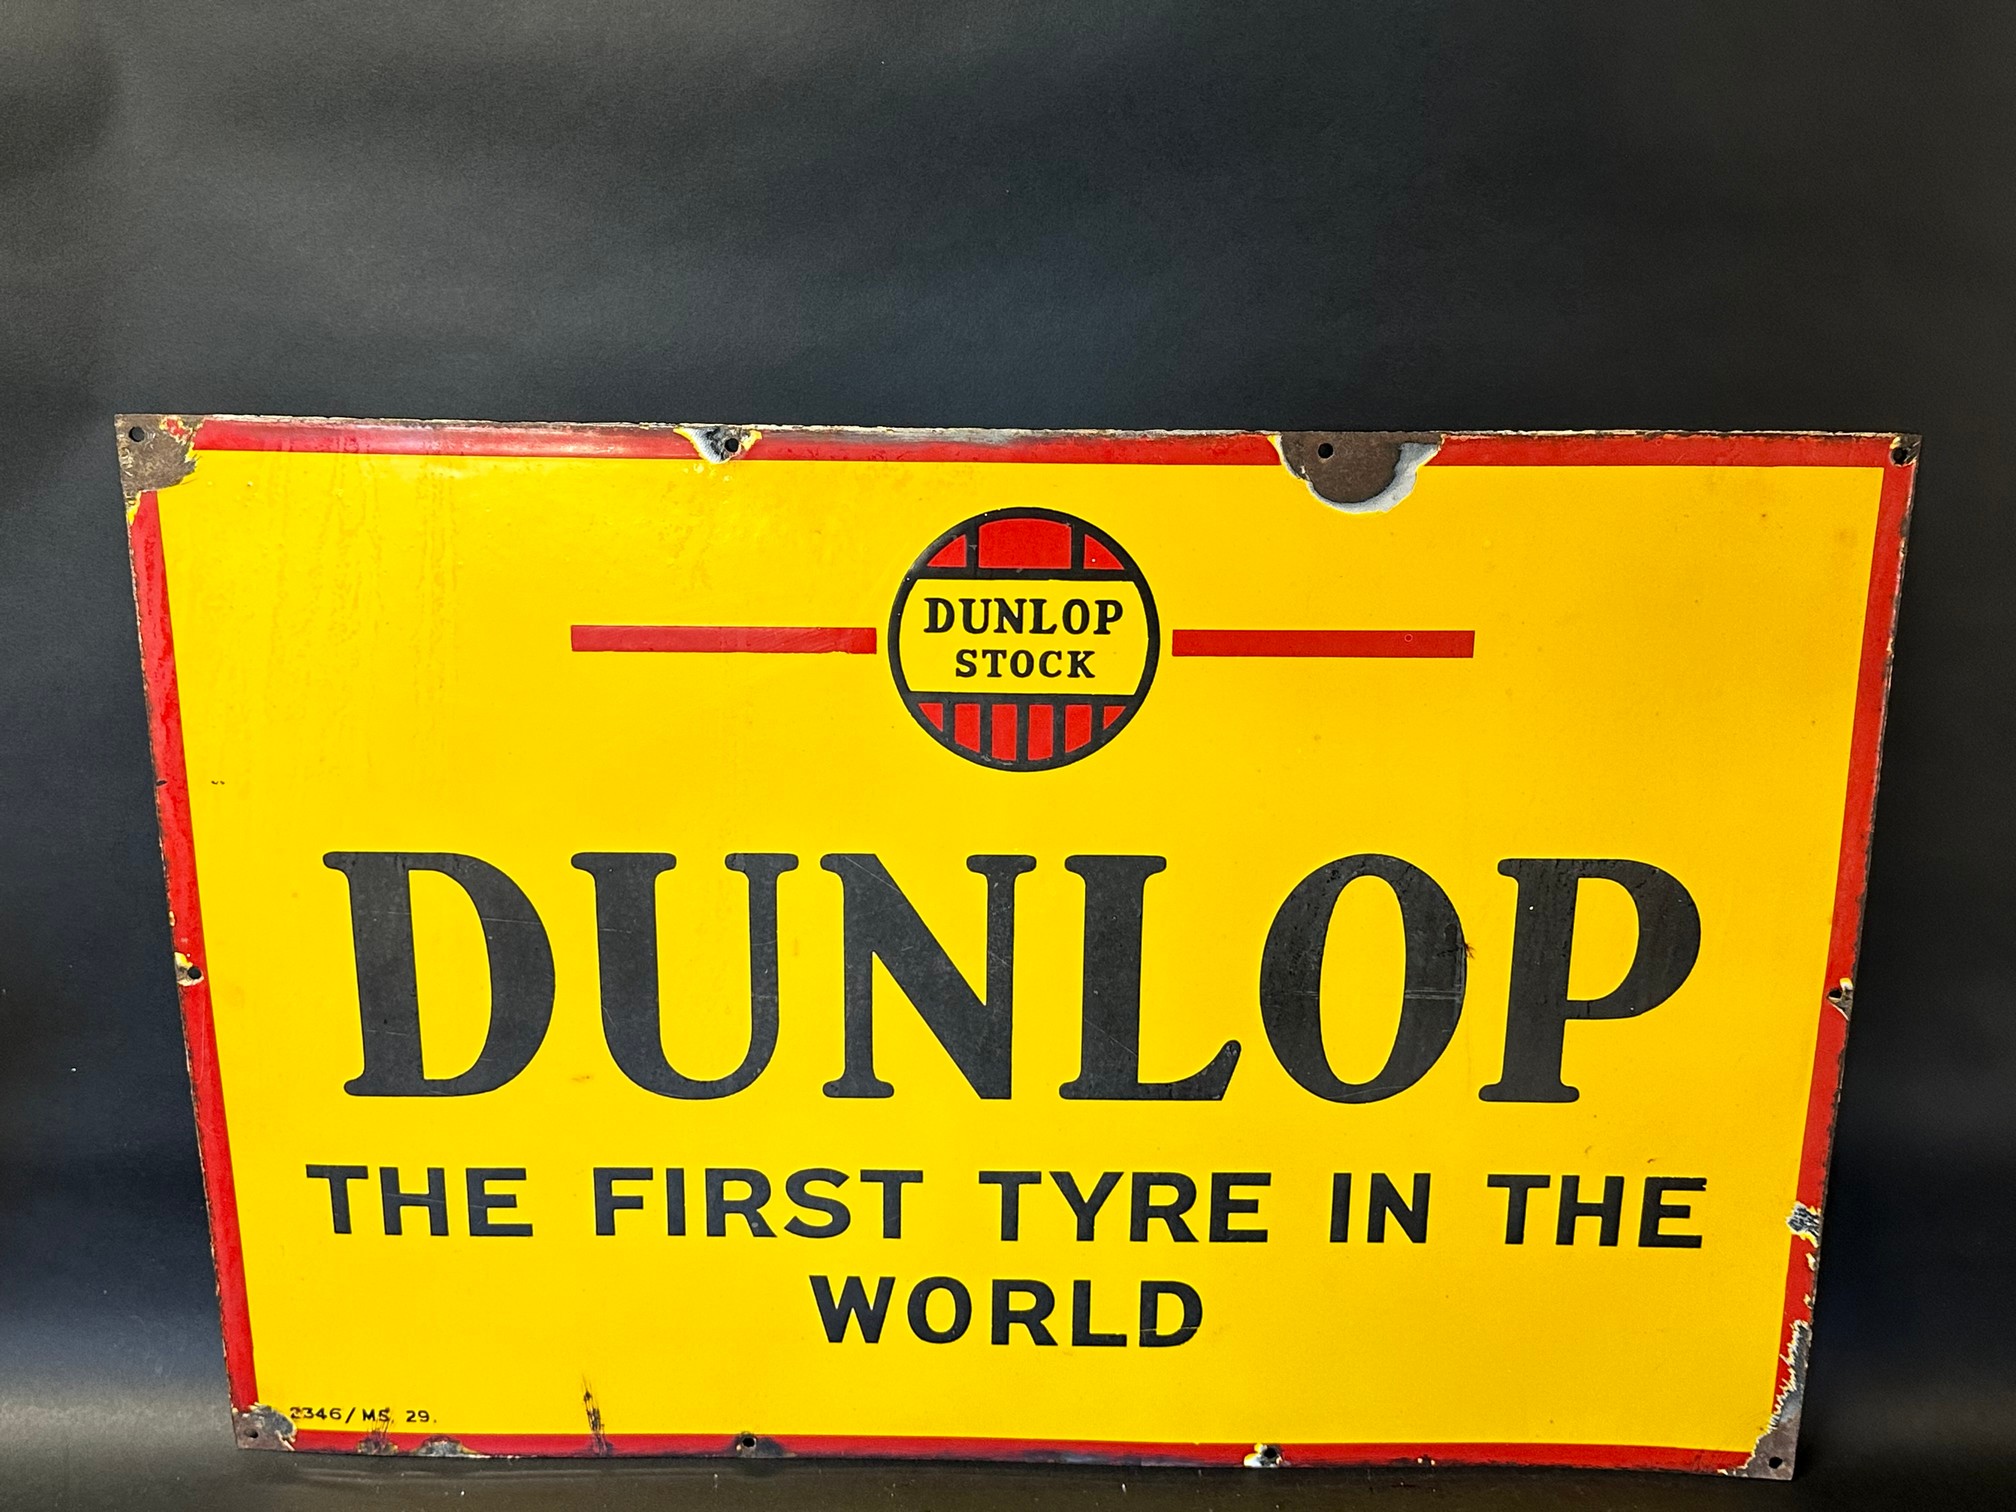 A Dunlop 'The first tyre in the world' enamel sign in good condition, 30 x 20".